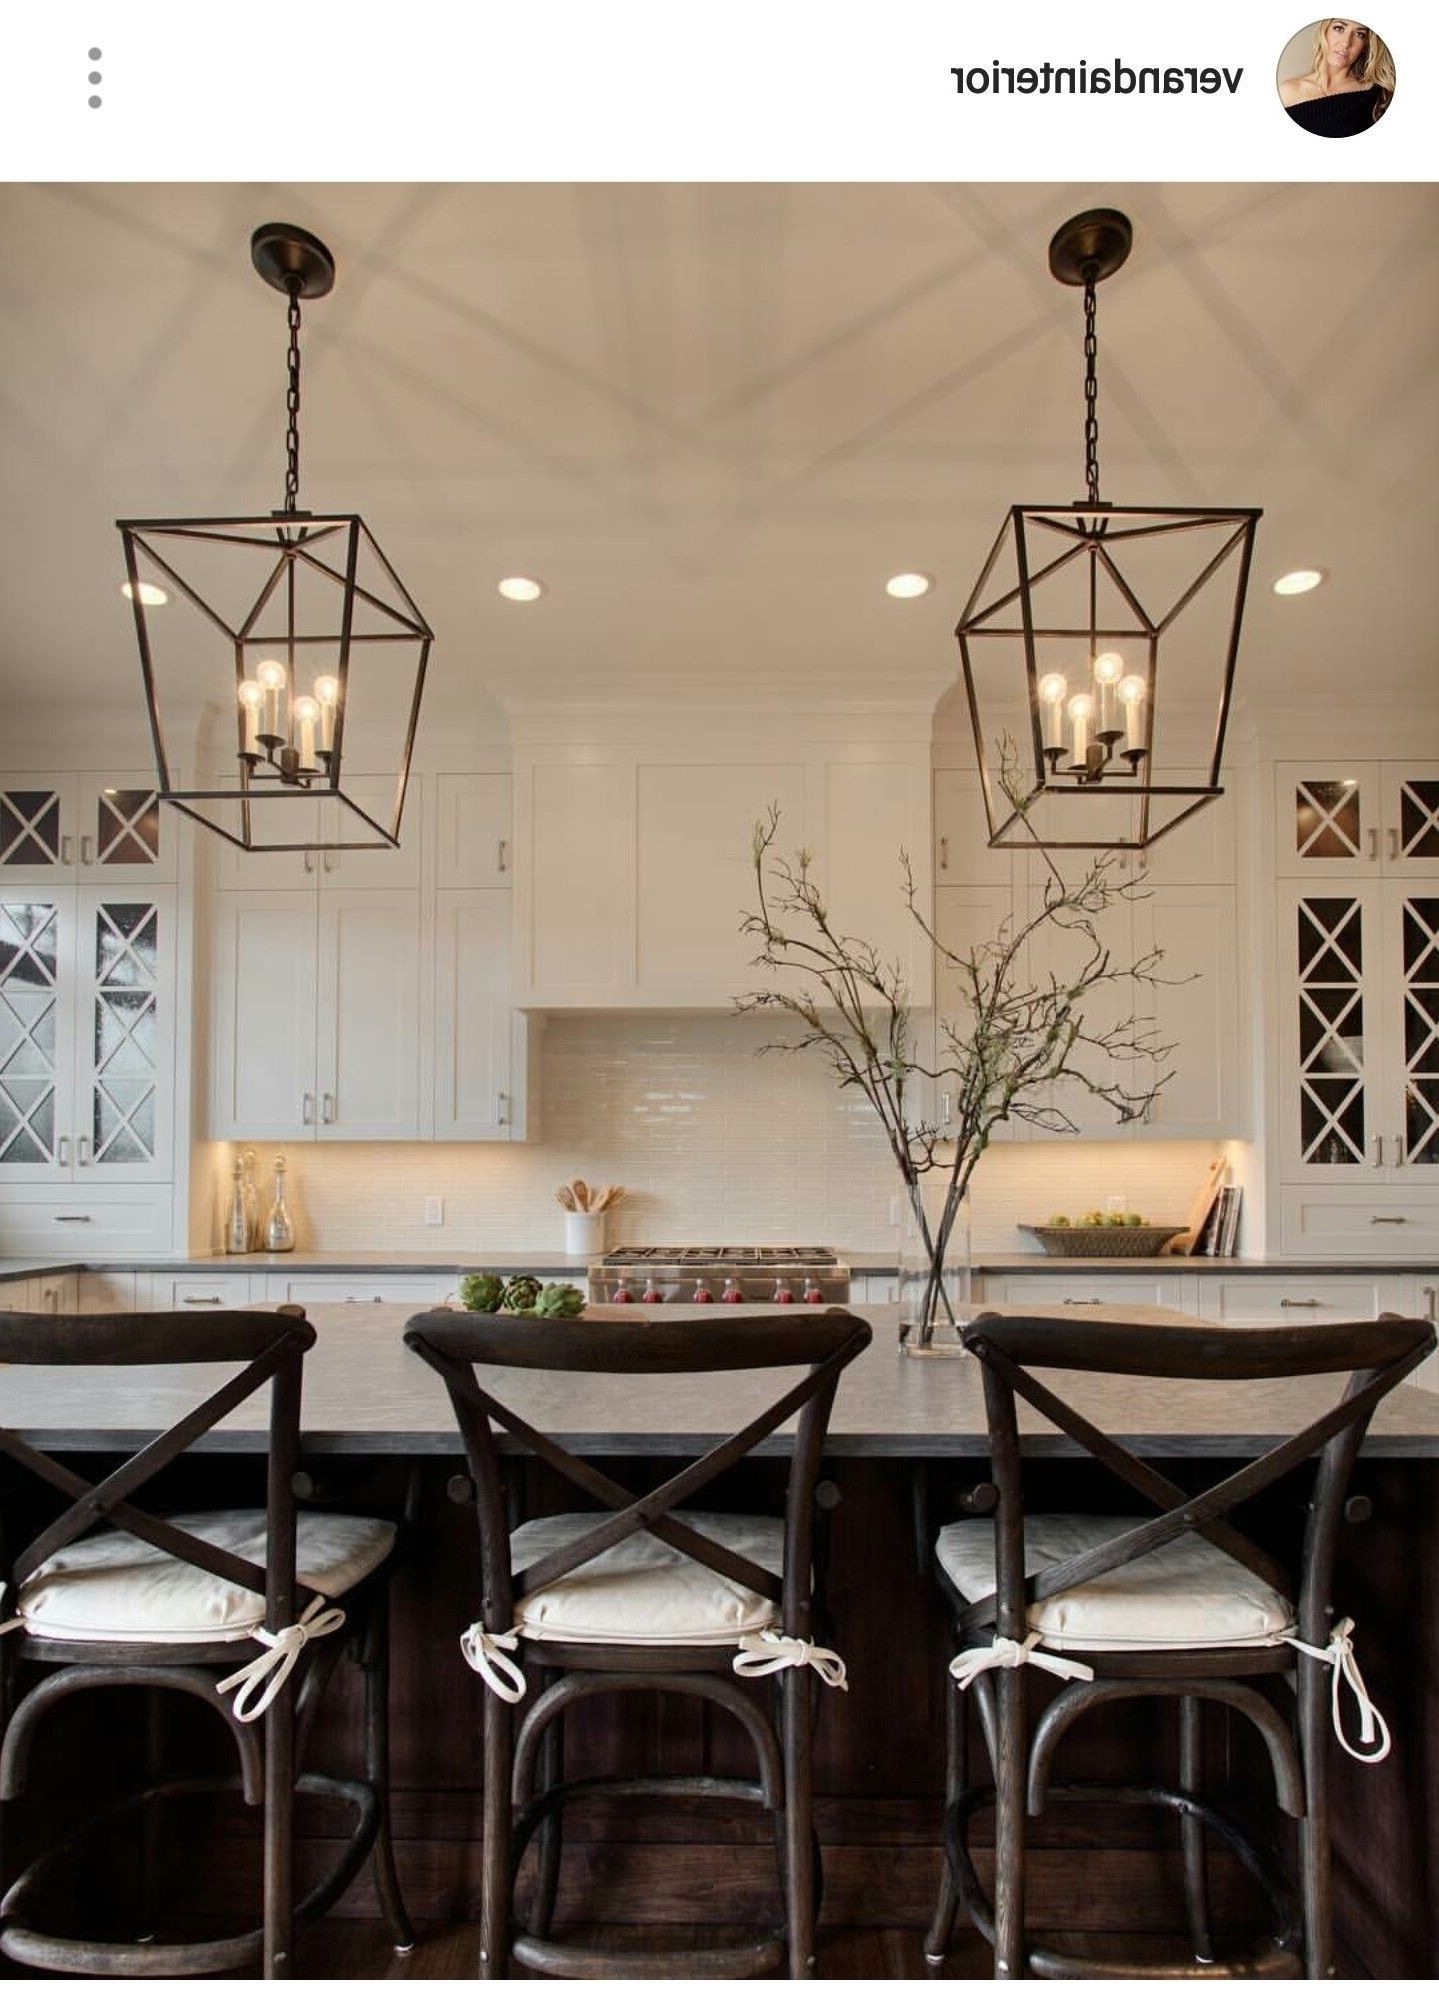 Newest Kitchen Island Light Chandeliers Intended For Kitchen Pendants Lights Over Island – Ideas On Foter (View 15 of 20)